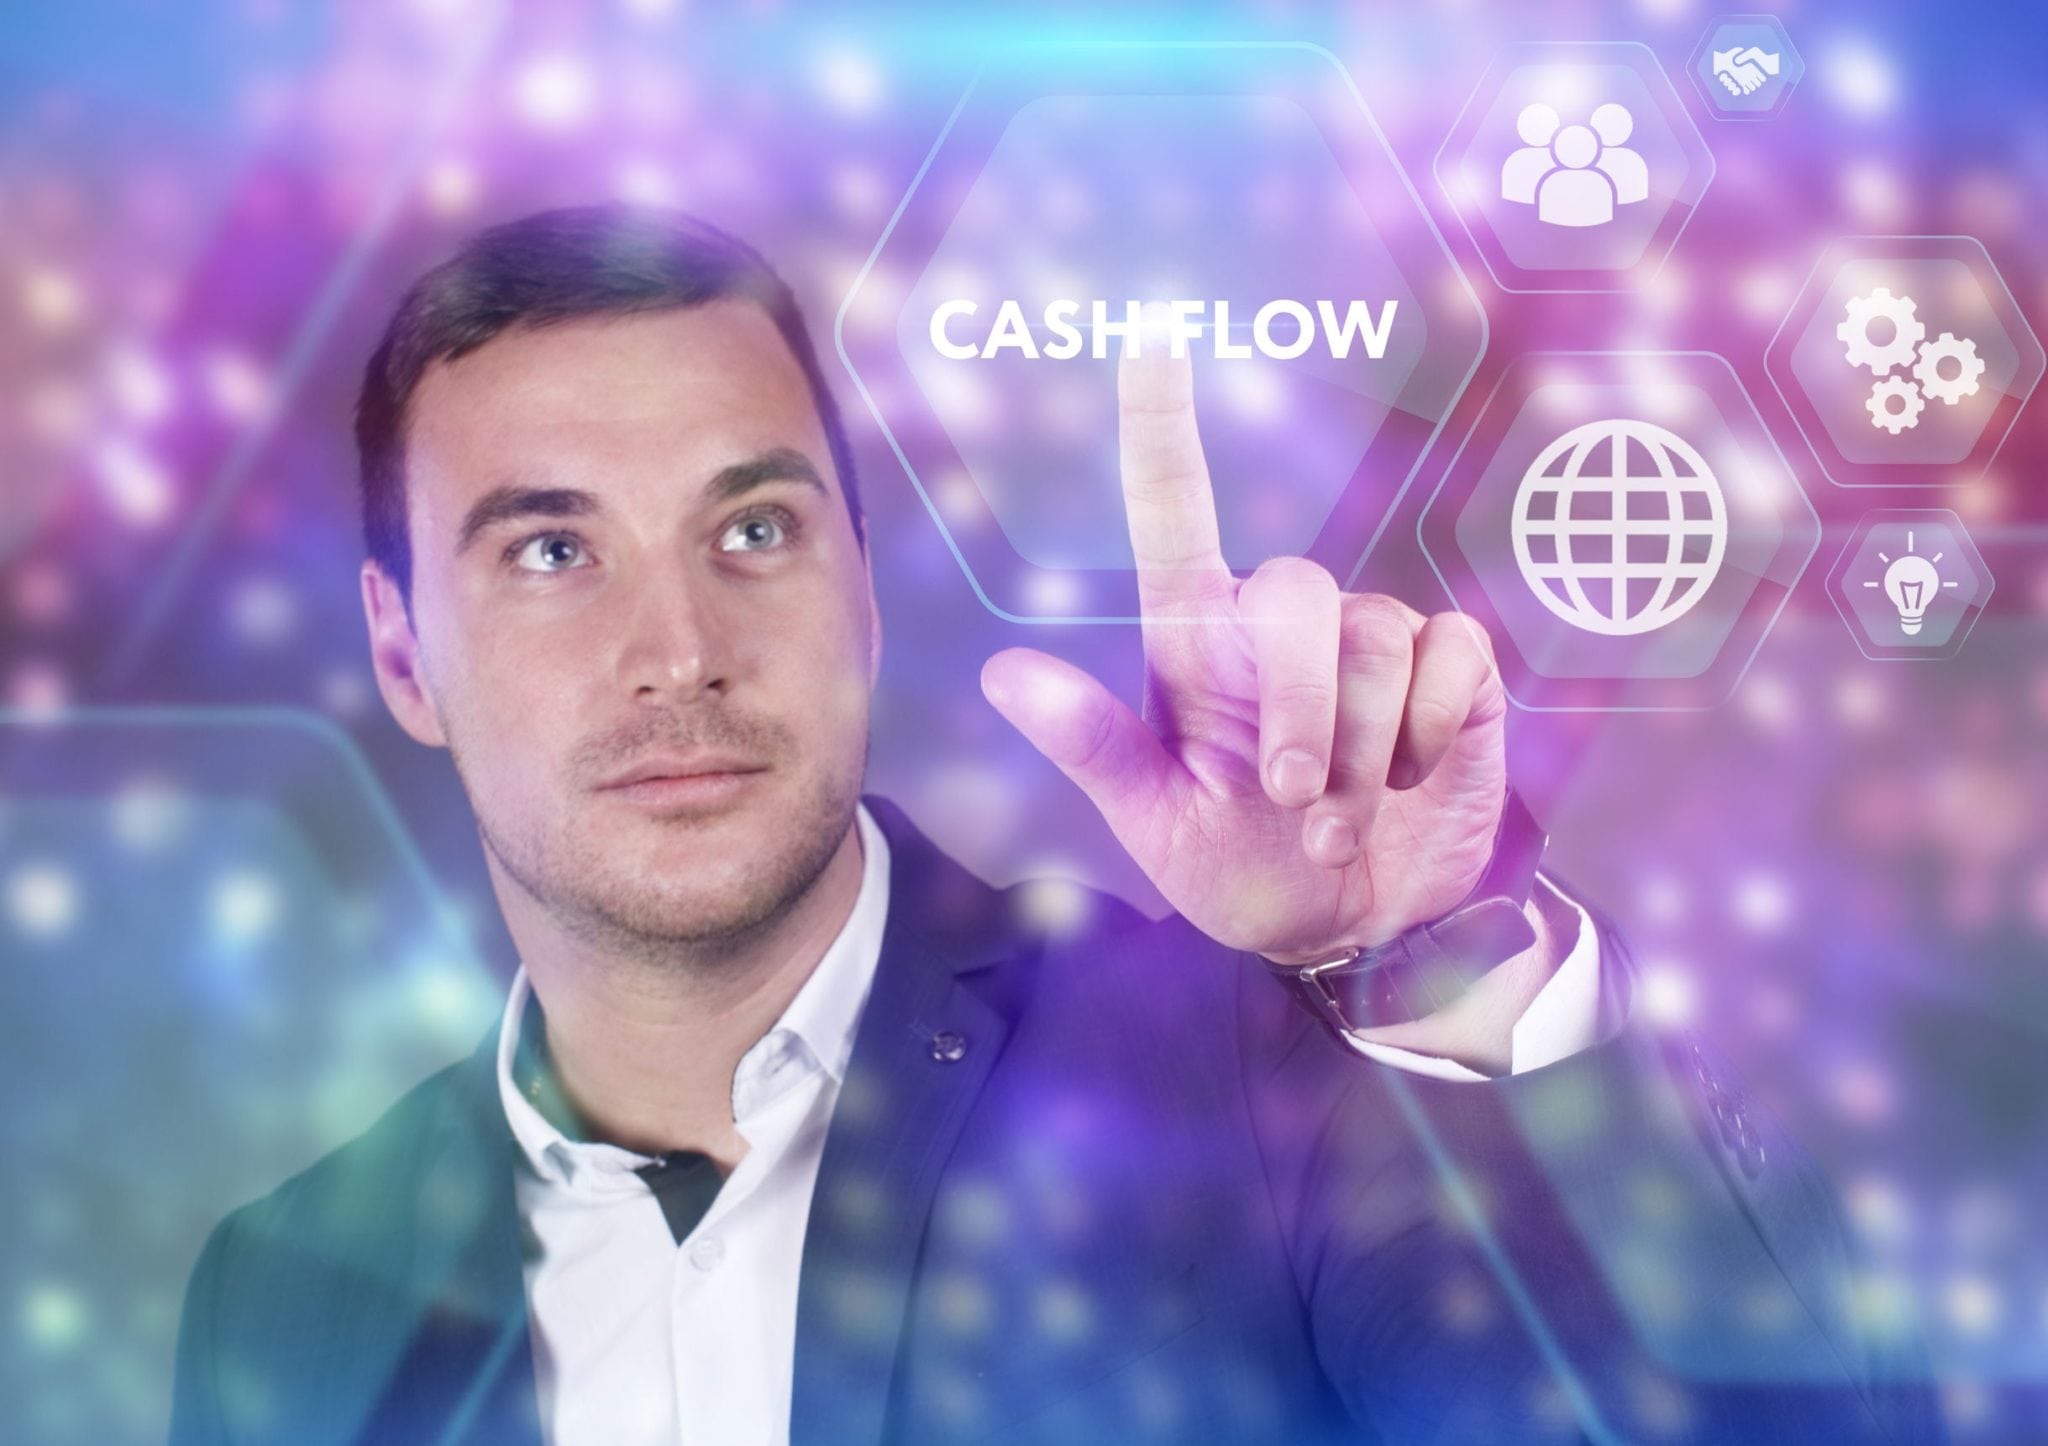 Are Your Cash Flows Growing In Line With Your Business?